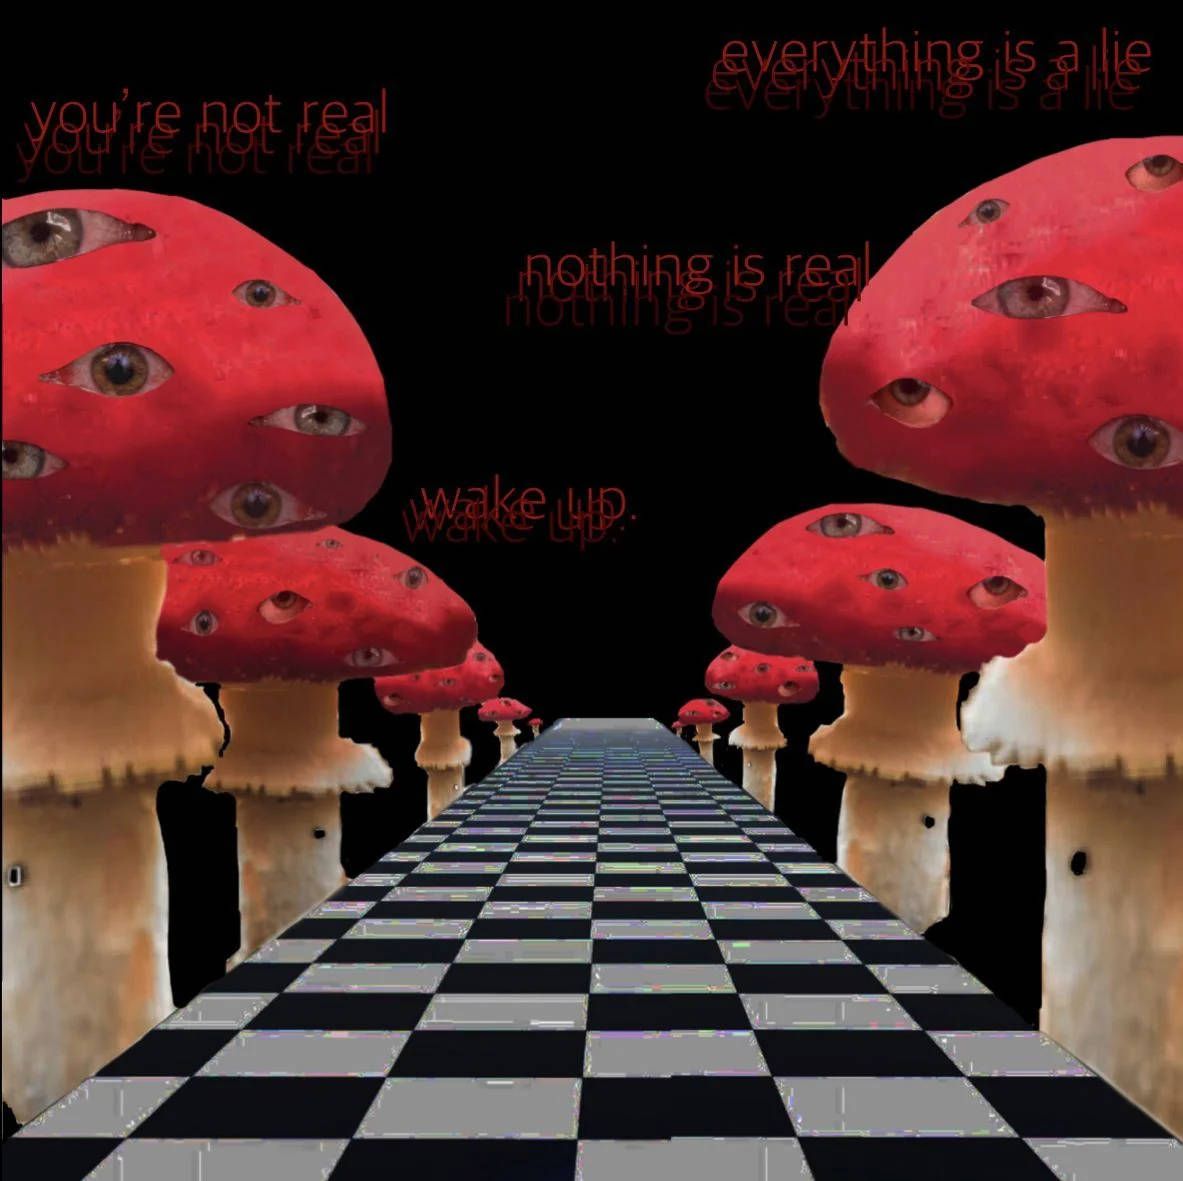 Red mushrooms with many eyes on a black and white checkered floor with the words 